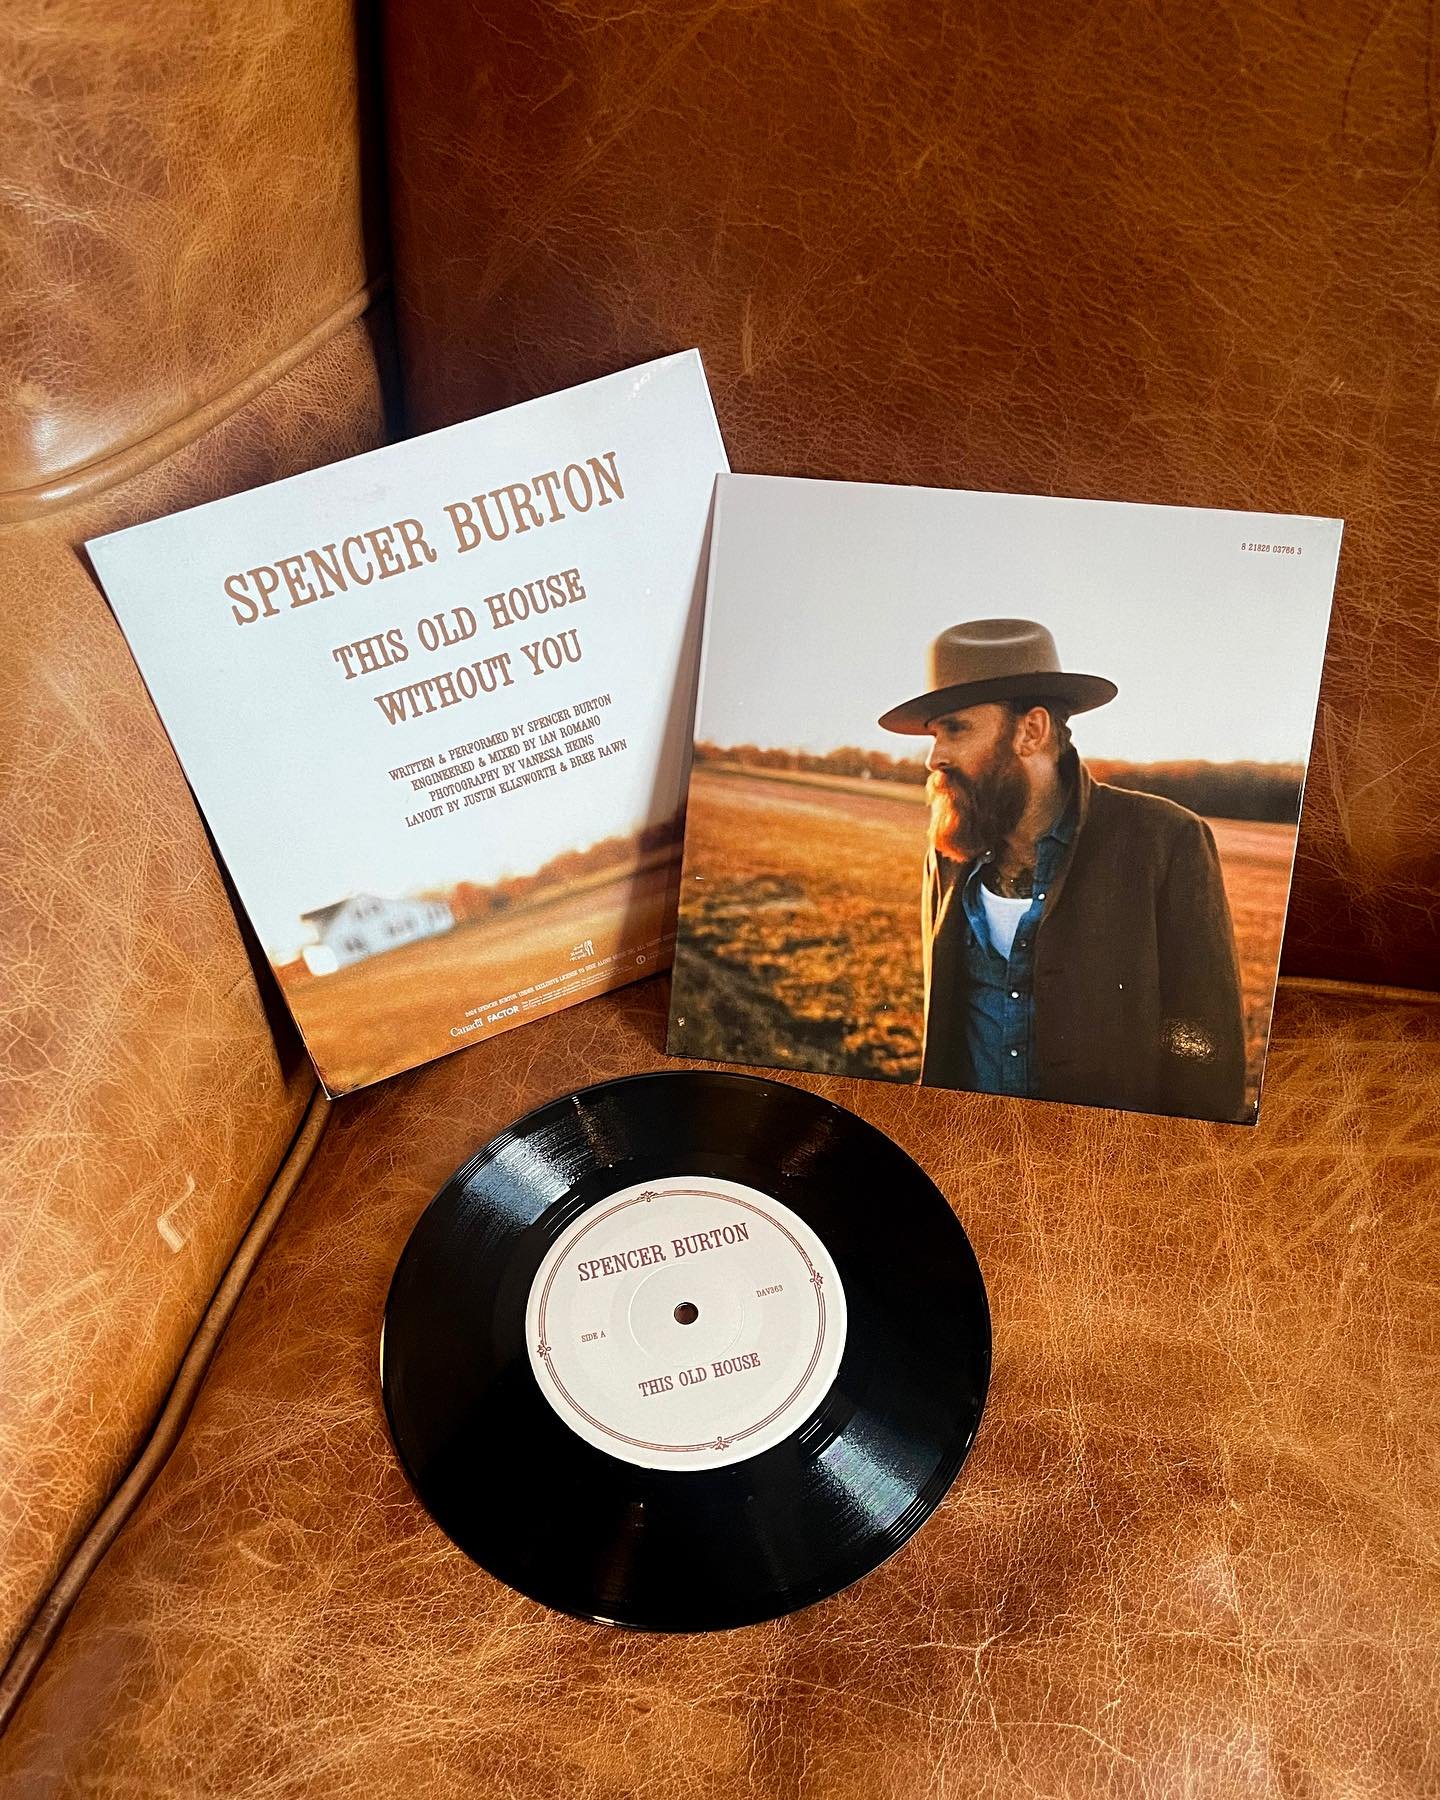 Me and a guitar. Campfire vibes. Just how I like it. Limited edition 7 inch. Available only at the dine alone records store April 20th. Available all other places later this year. Two never before released songs &ldquo;this old house&rdquo; and &ldqu